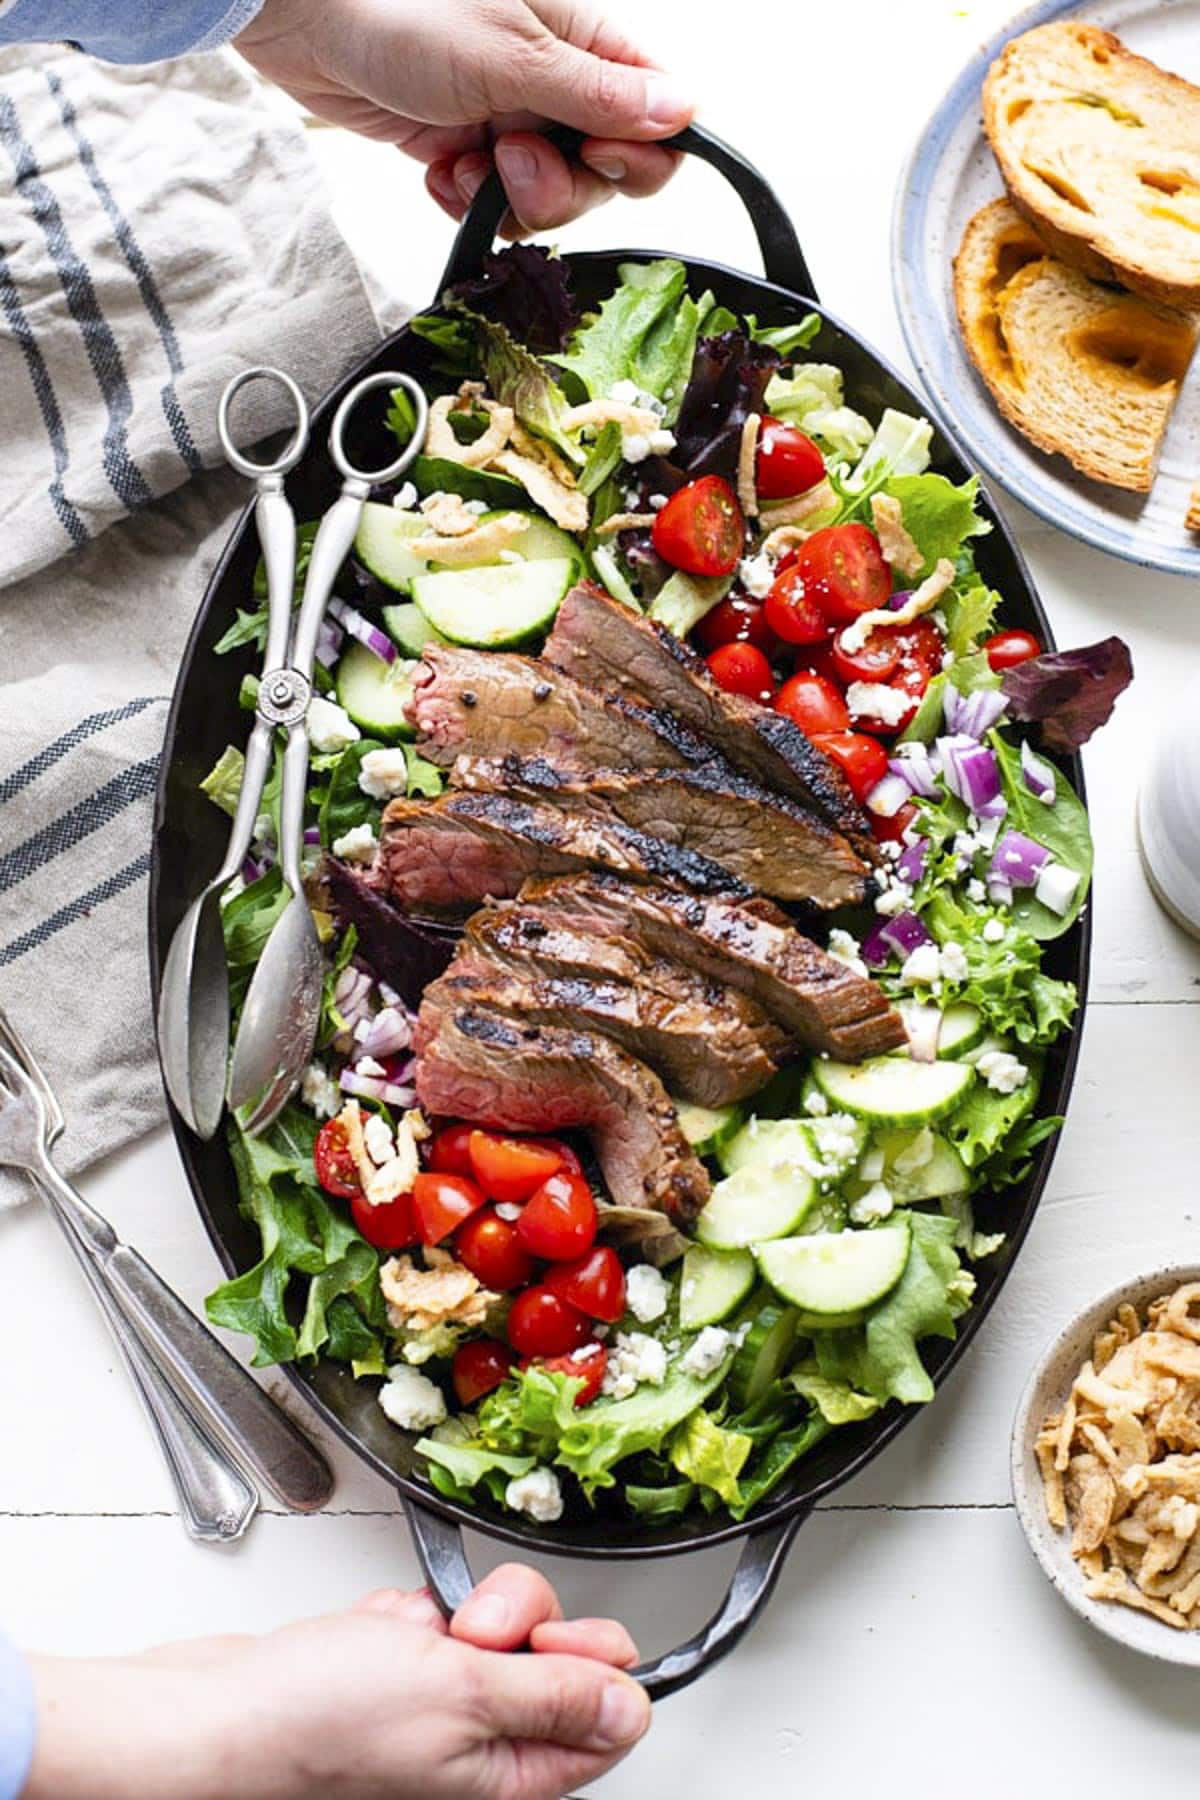 Simple steak salad with grilled flank steak and homemade balsamic dressing on a white table.